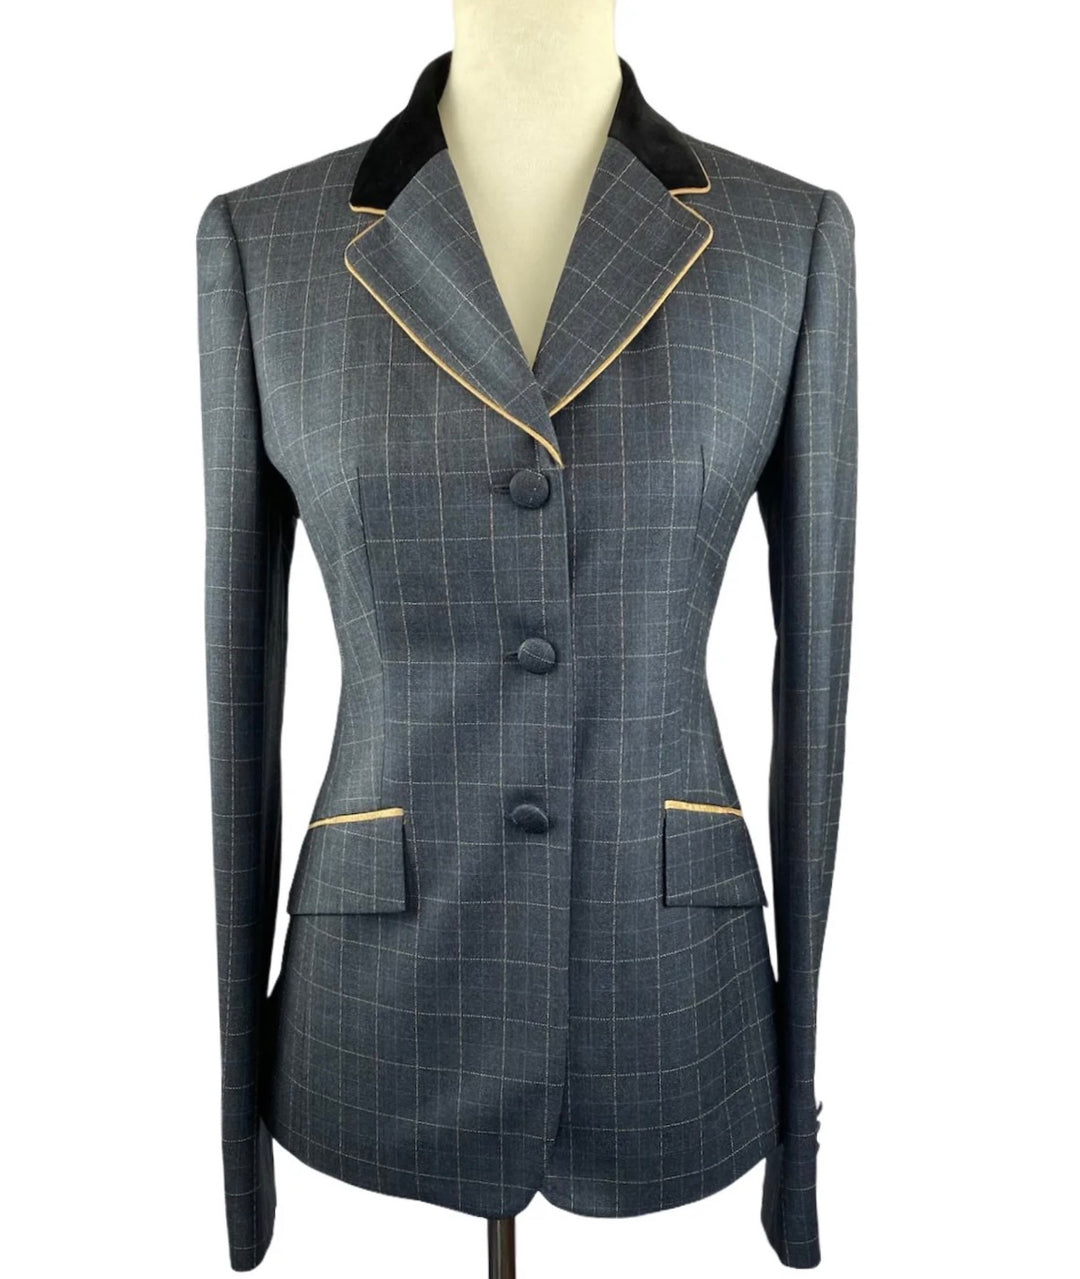 The Kara All Day Suit